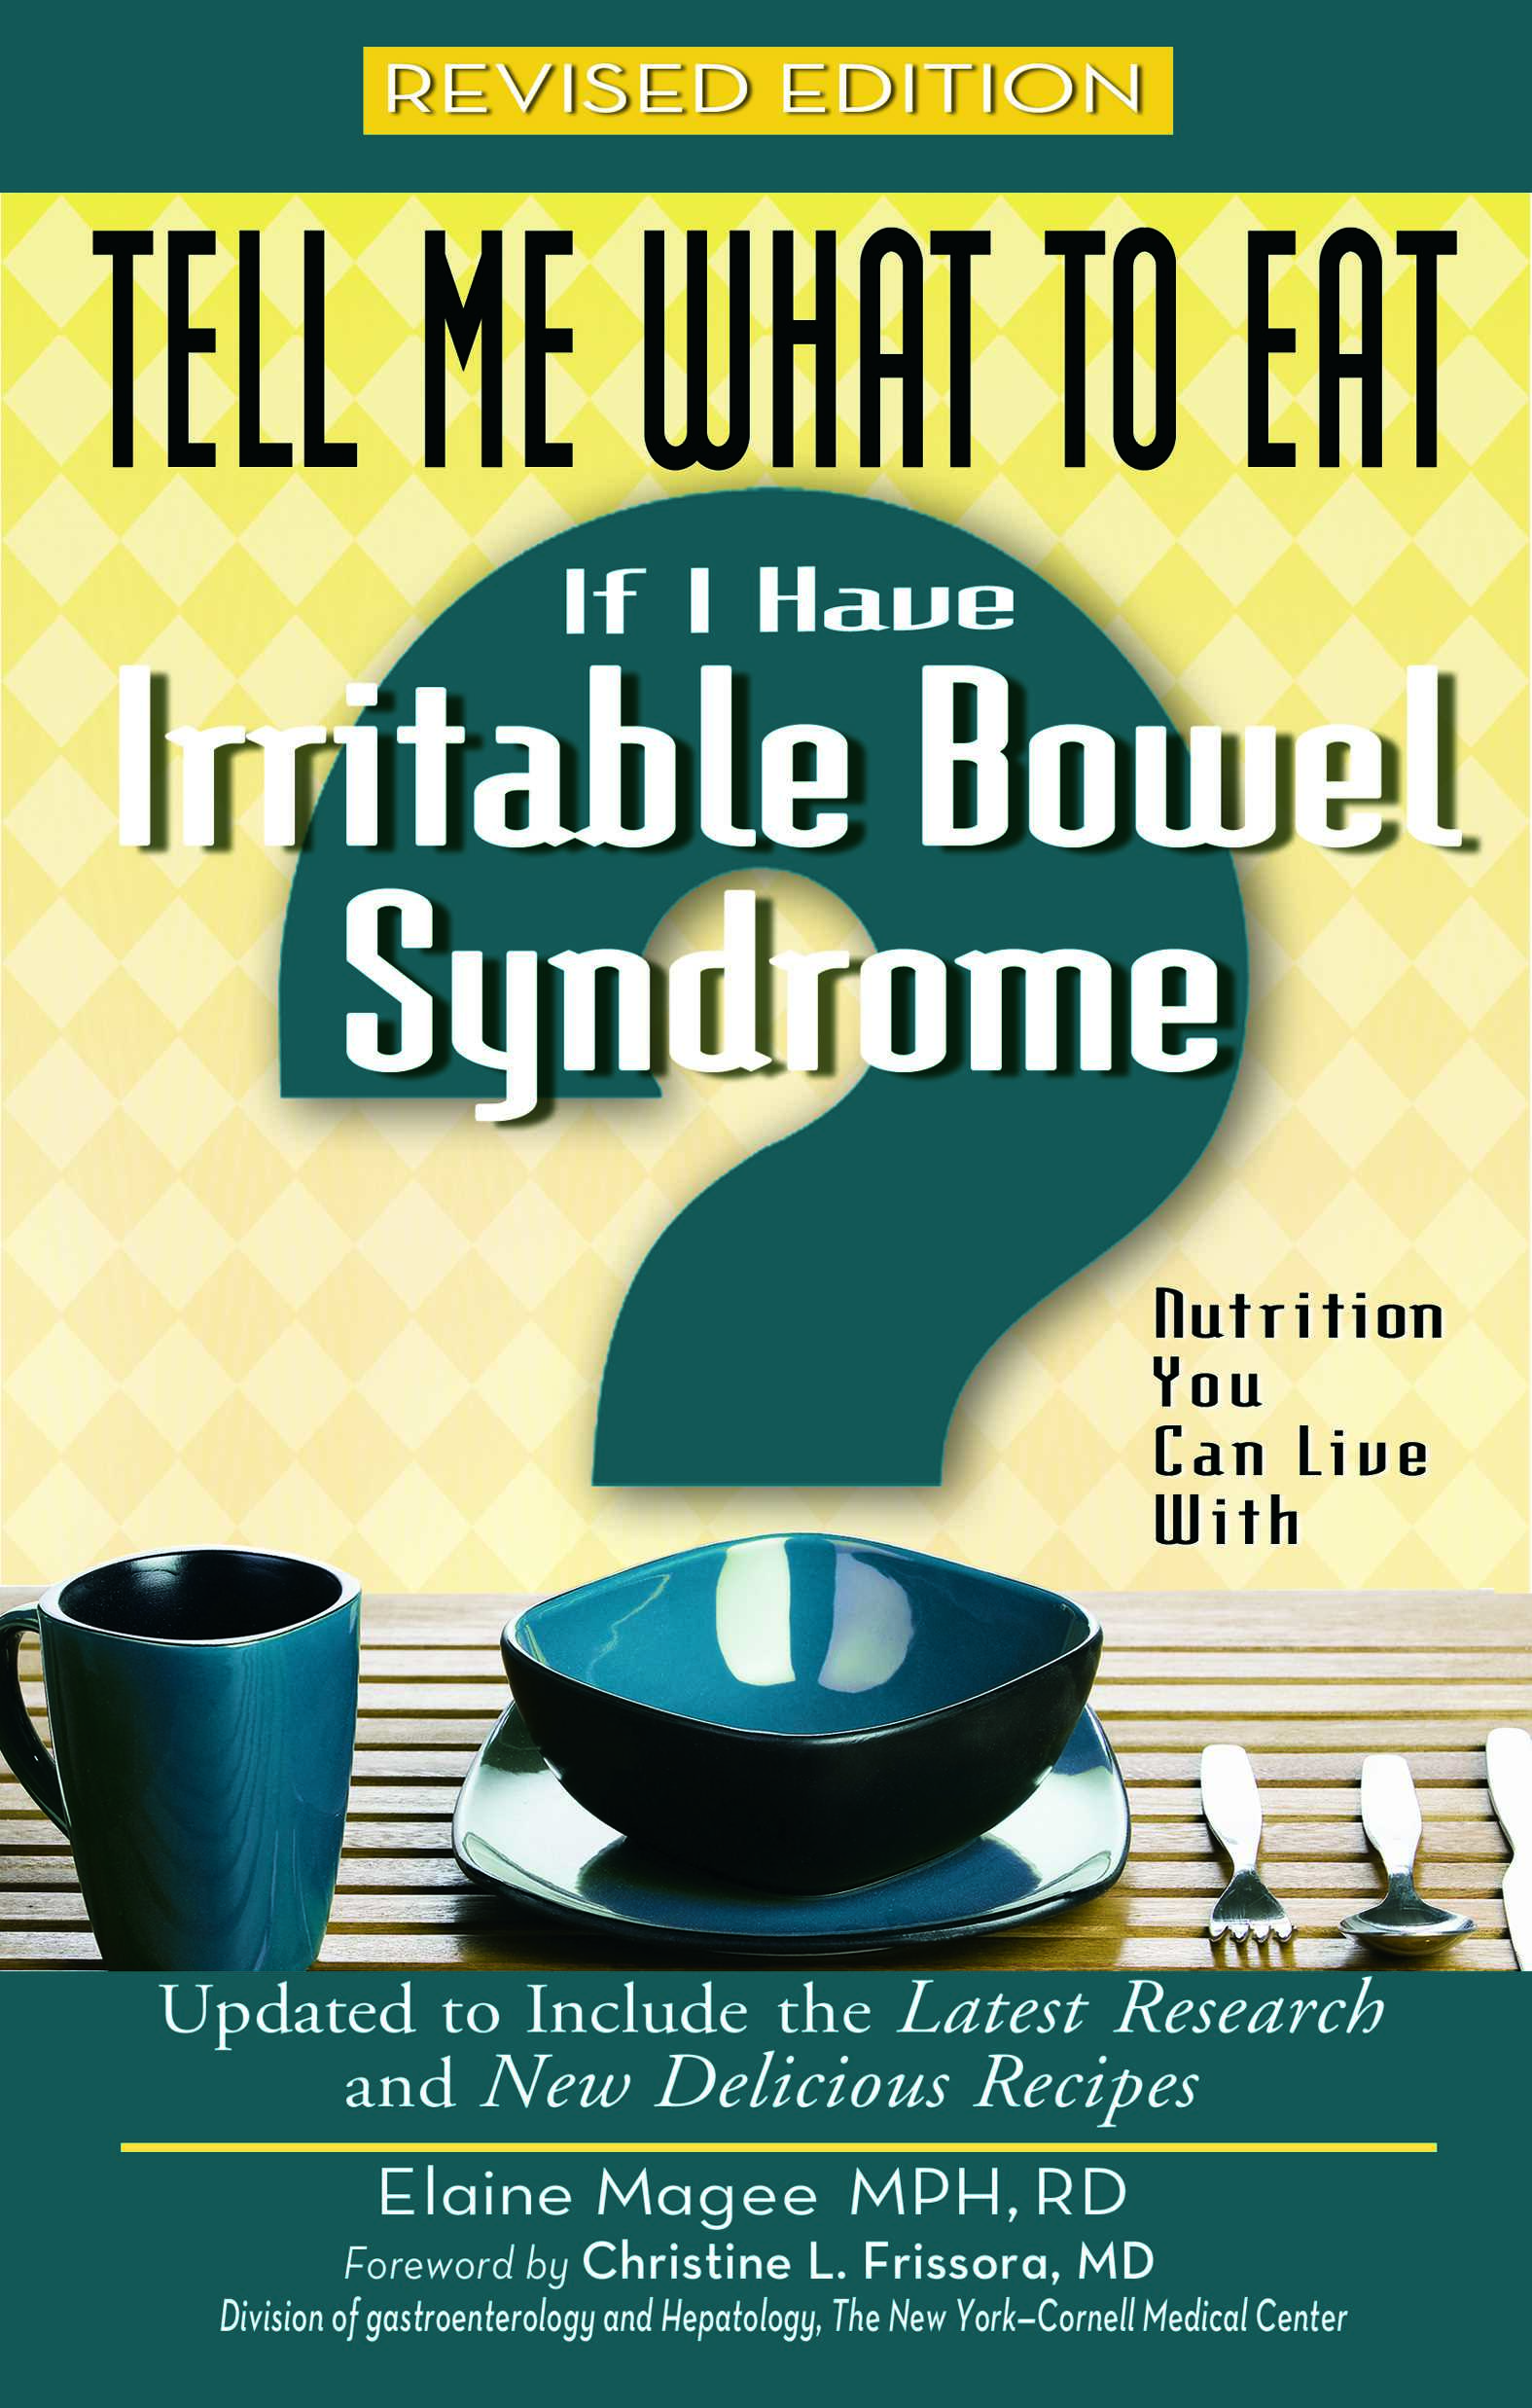 Tell Me What to Eat If I Have Irritable Bowel Syndrome (Revised Edition)